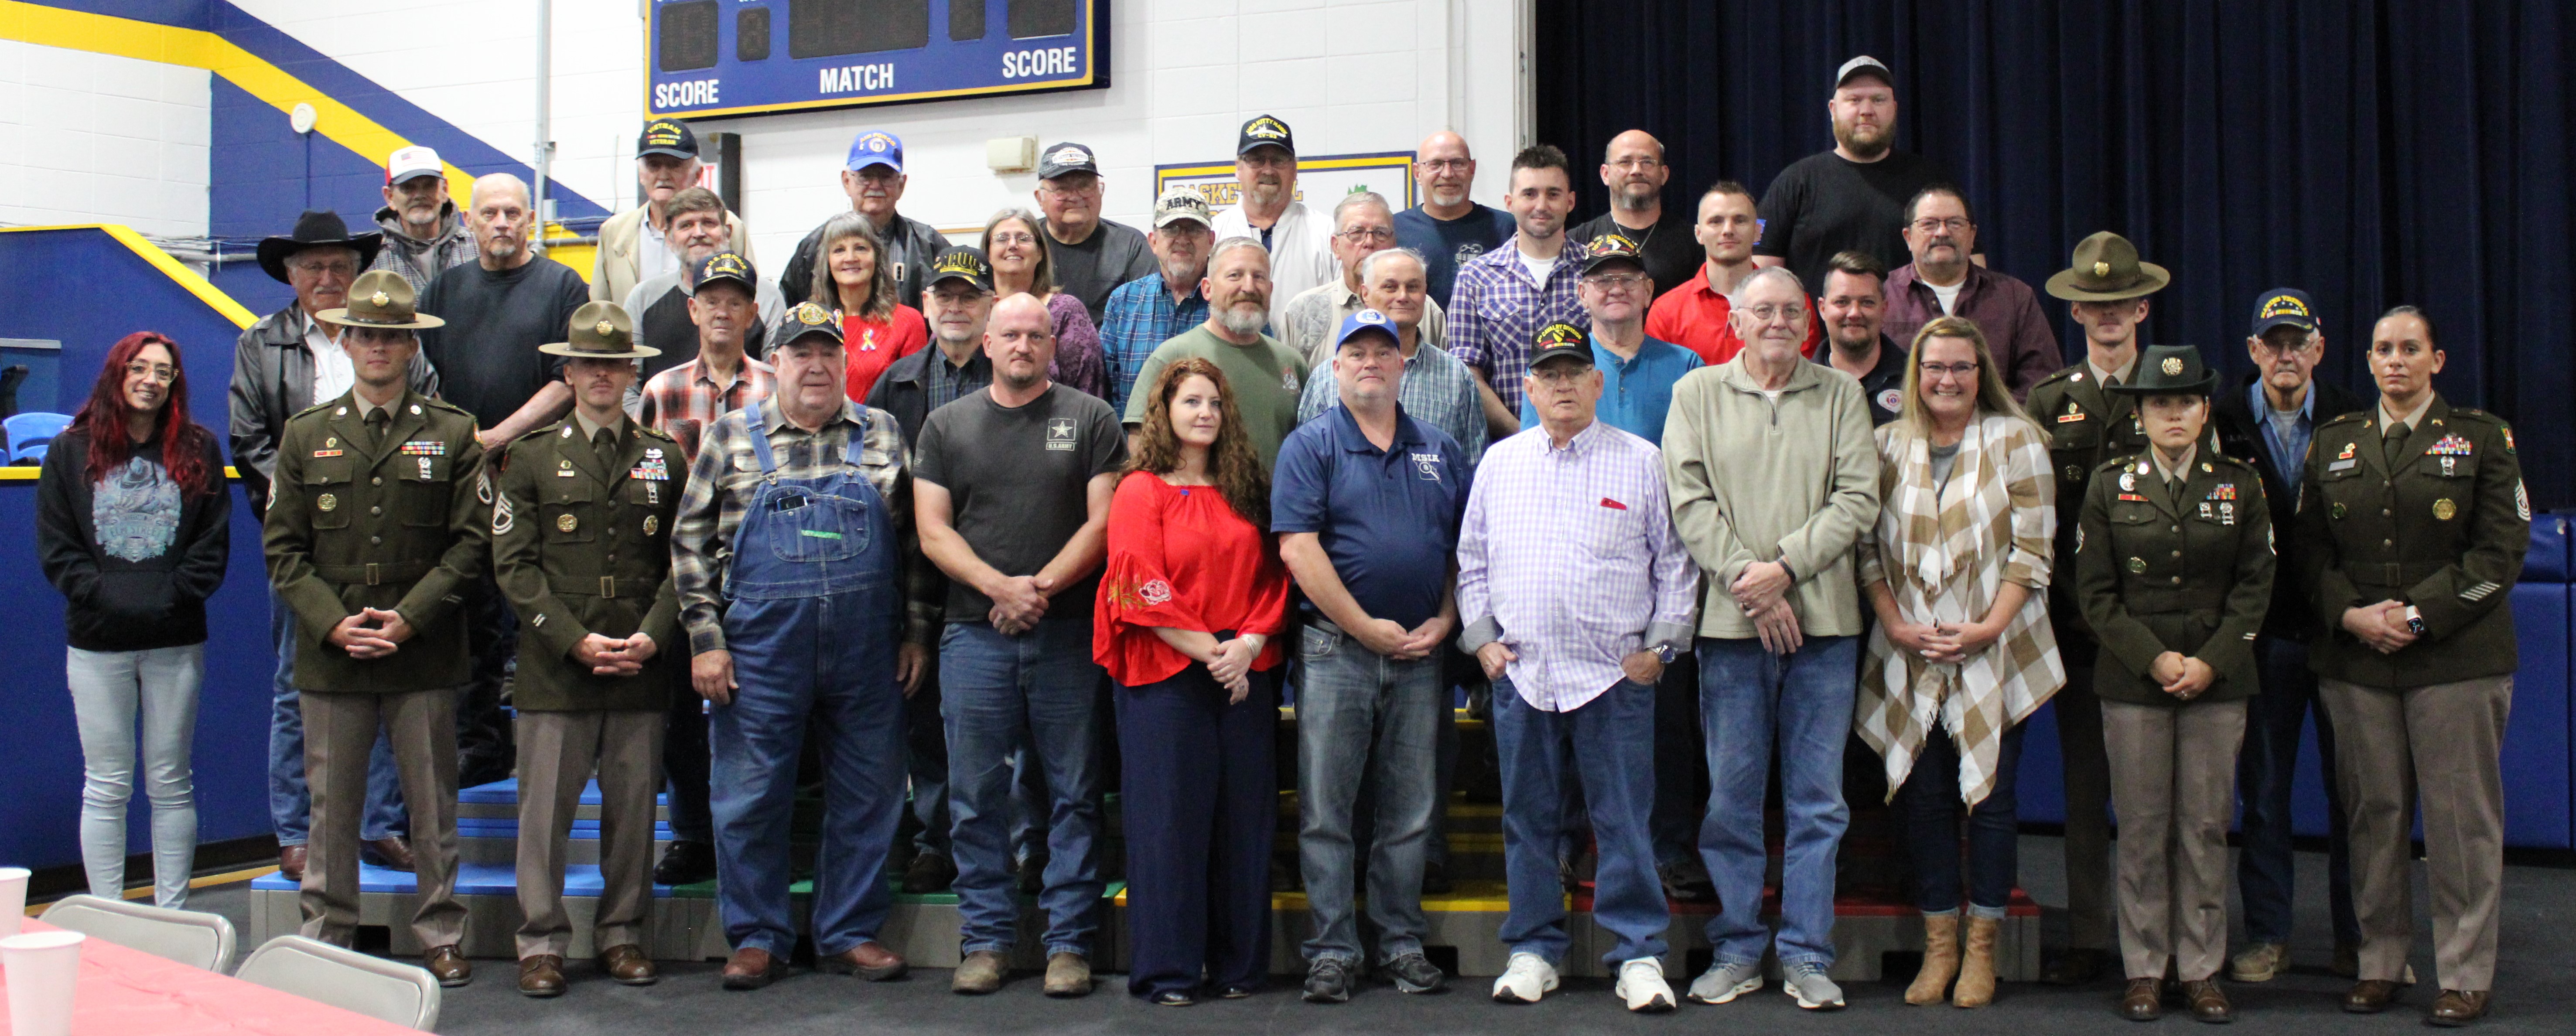 39 Vets gathered at Macks Creek School to be honored on Nov 11, 2022